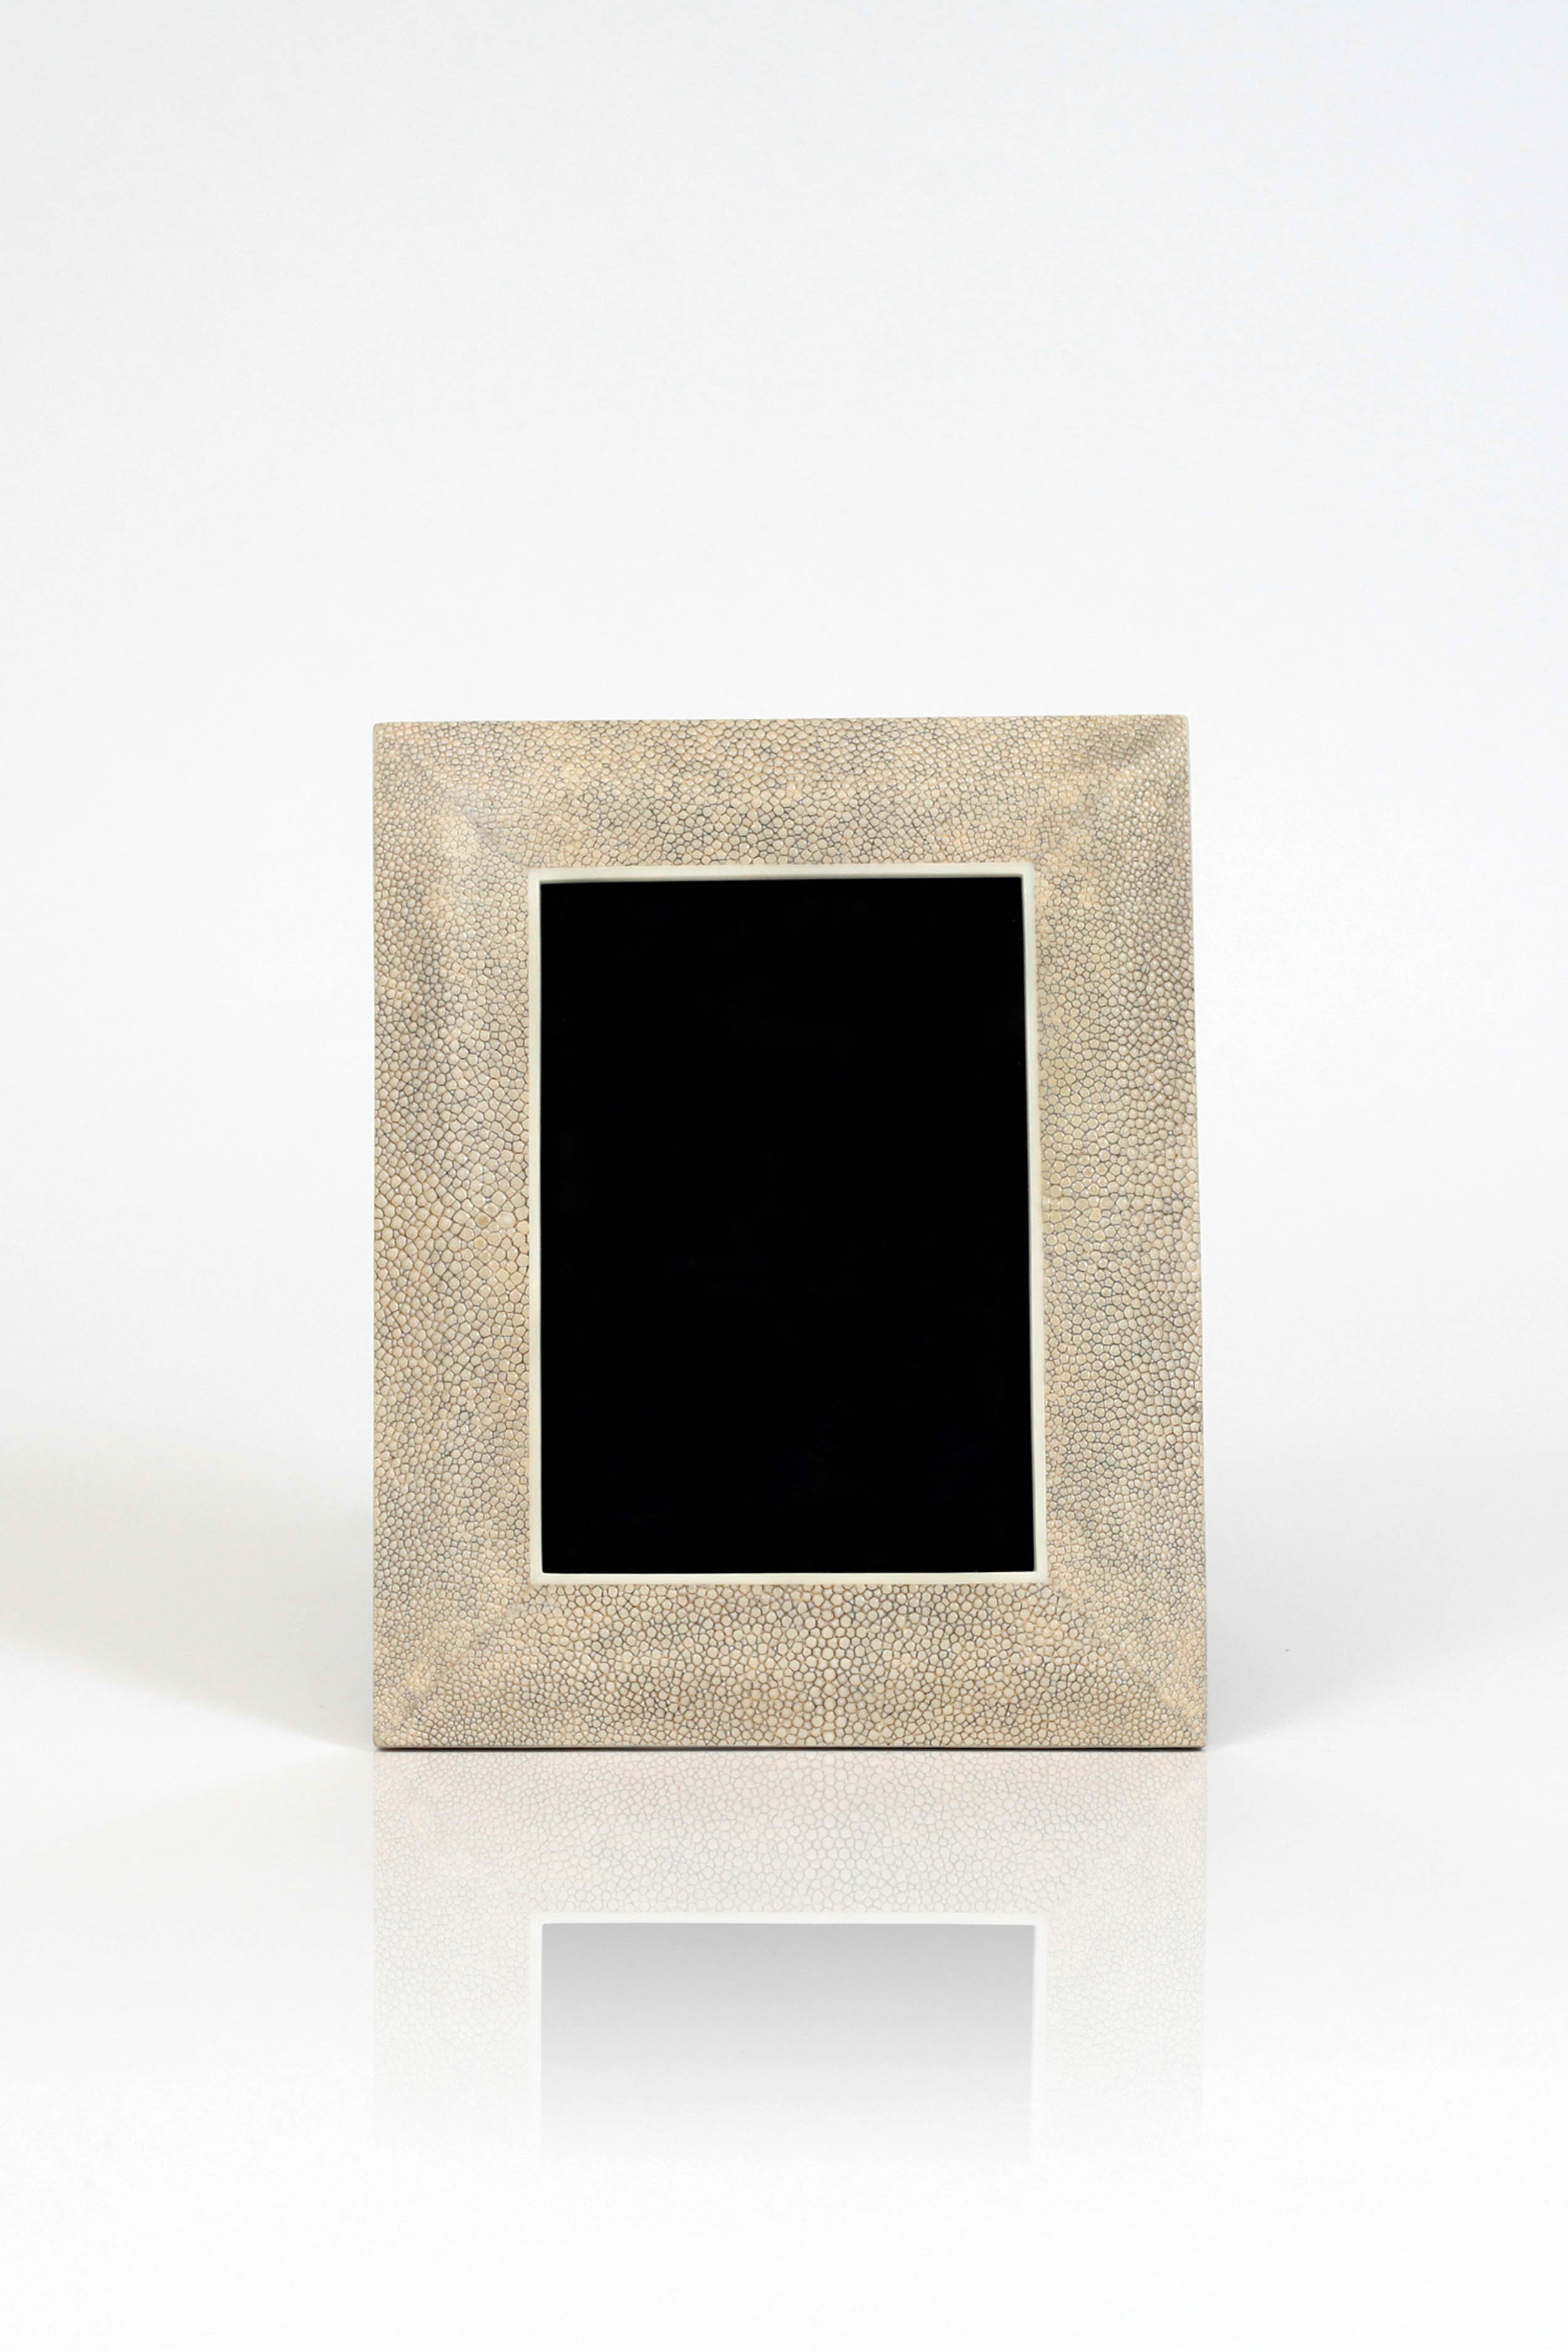 Art Deco Picture Frames  French Art Deco Gray Shagreen Picture Frame